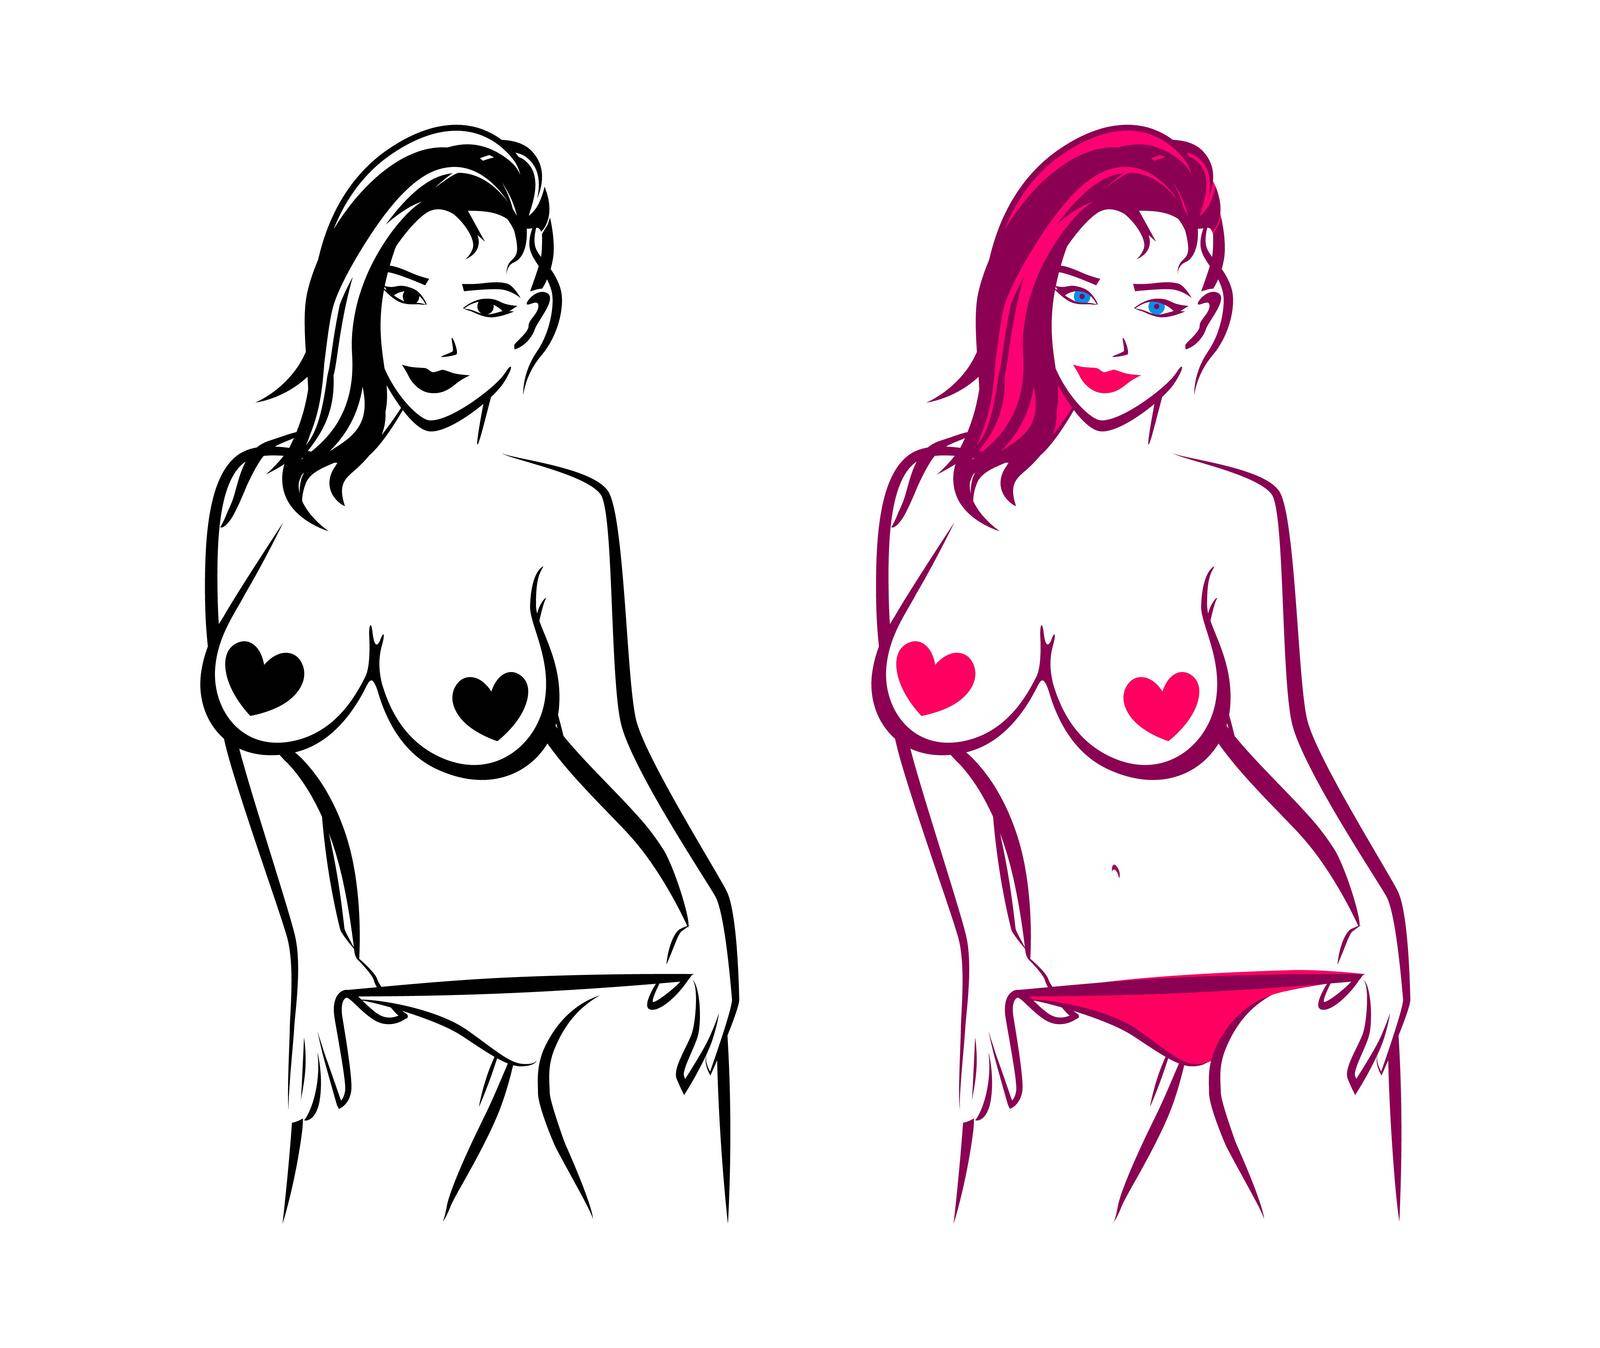 Bare Sexy Girl in black and pink color, Contour Erotic illustration for Sex Shop and Adult Websites.